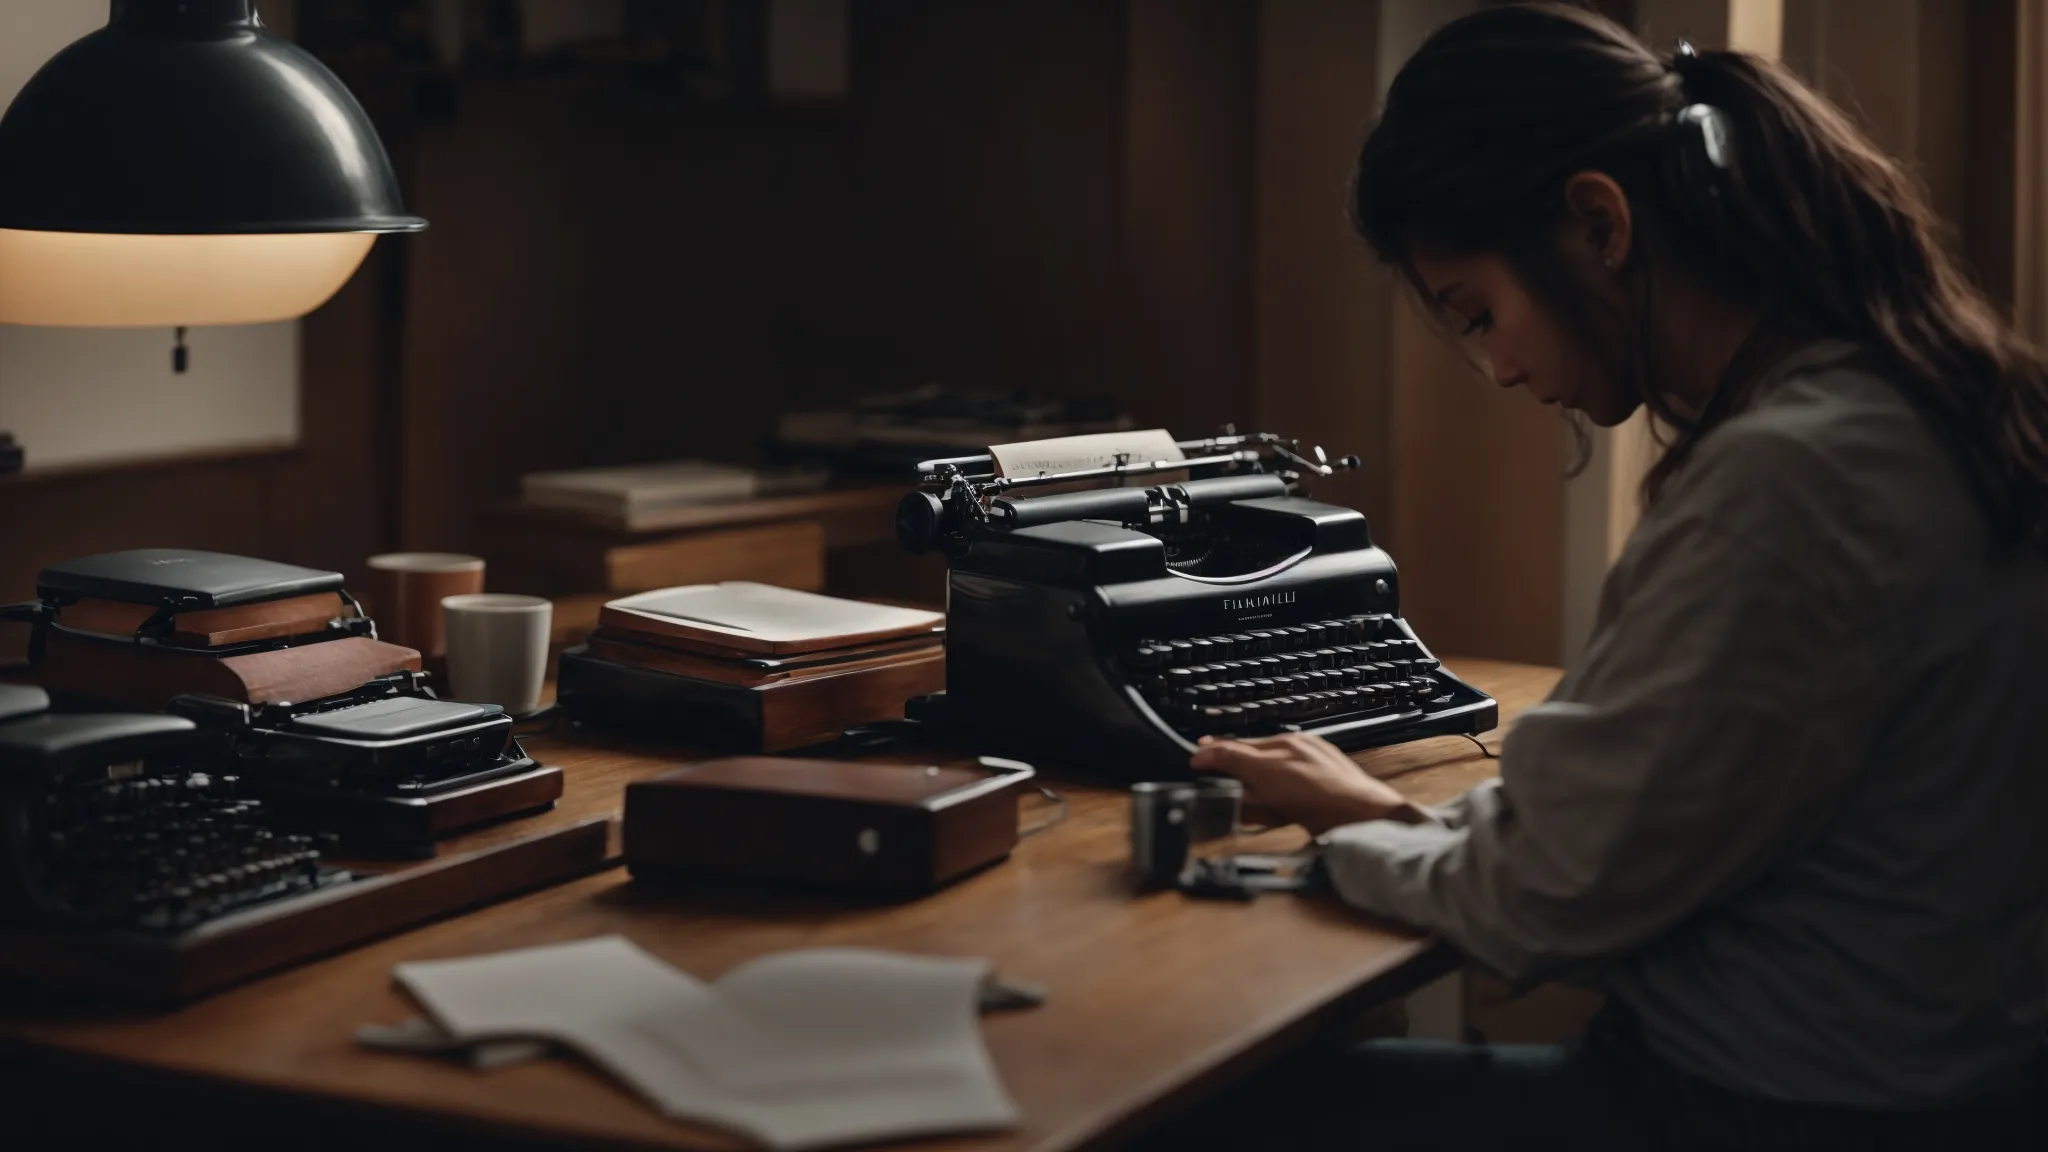 a person sits at a minimalist desk, immersed in typing on a vintage typewriter, surrounded by a serene setting that inspires focus and creativity.